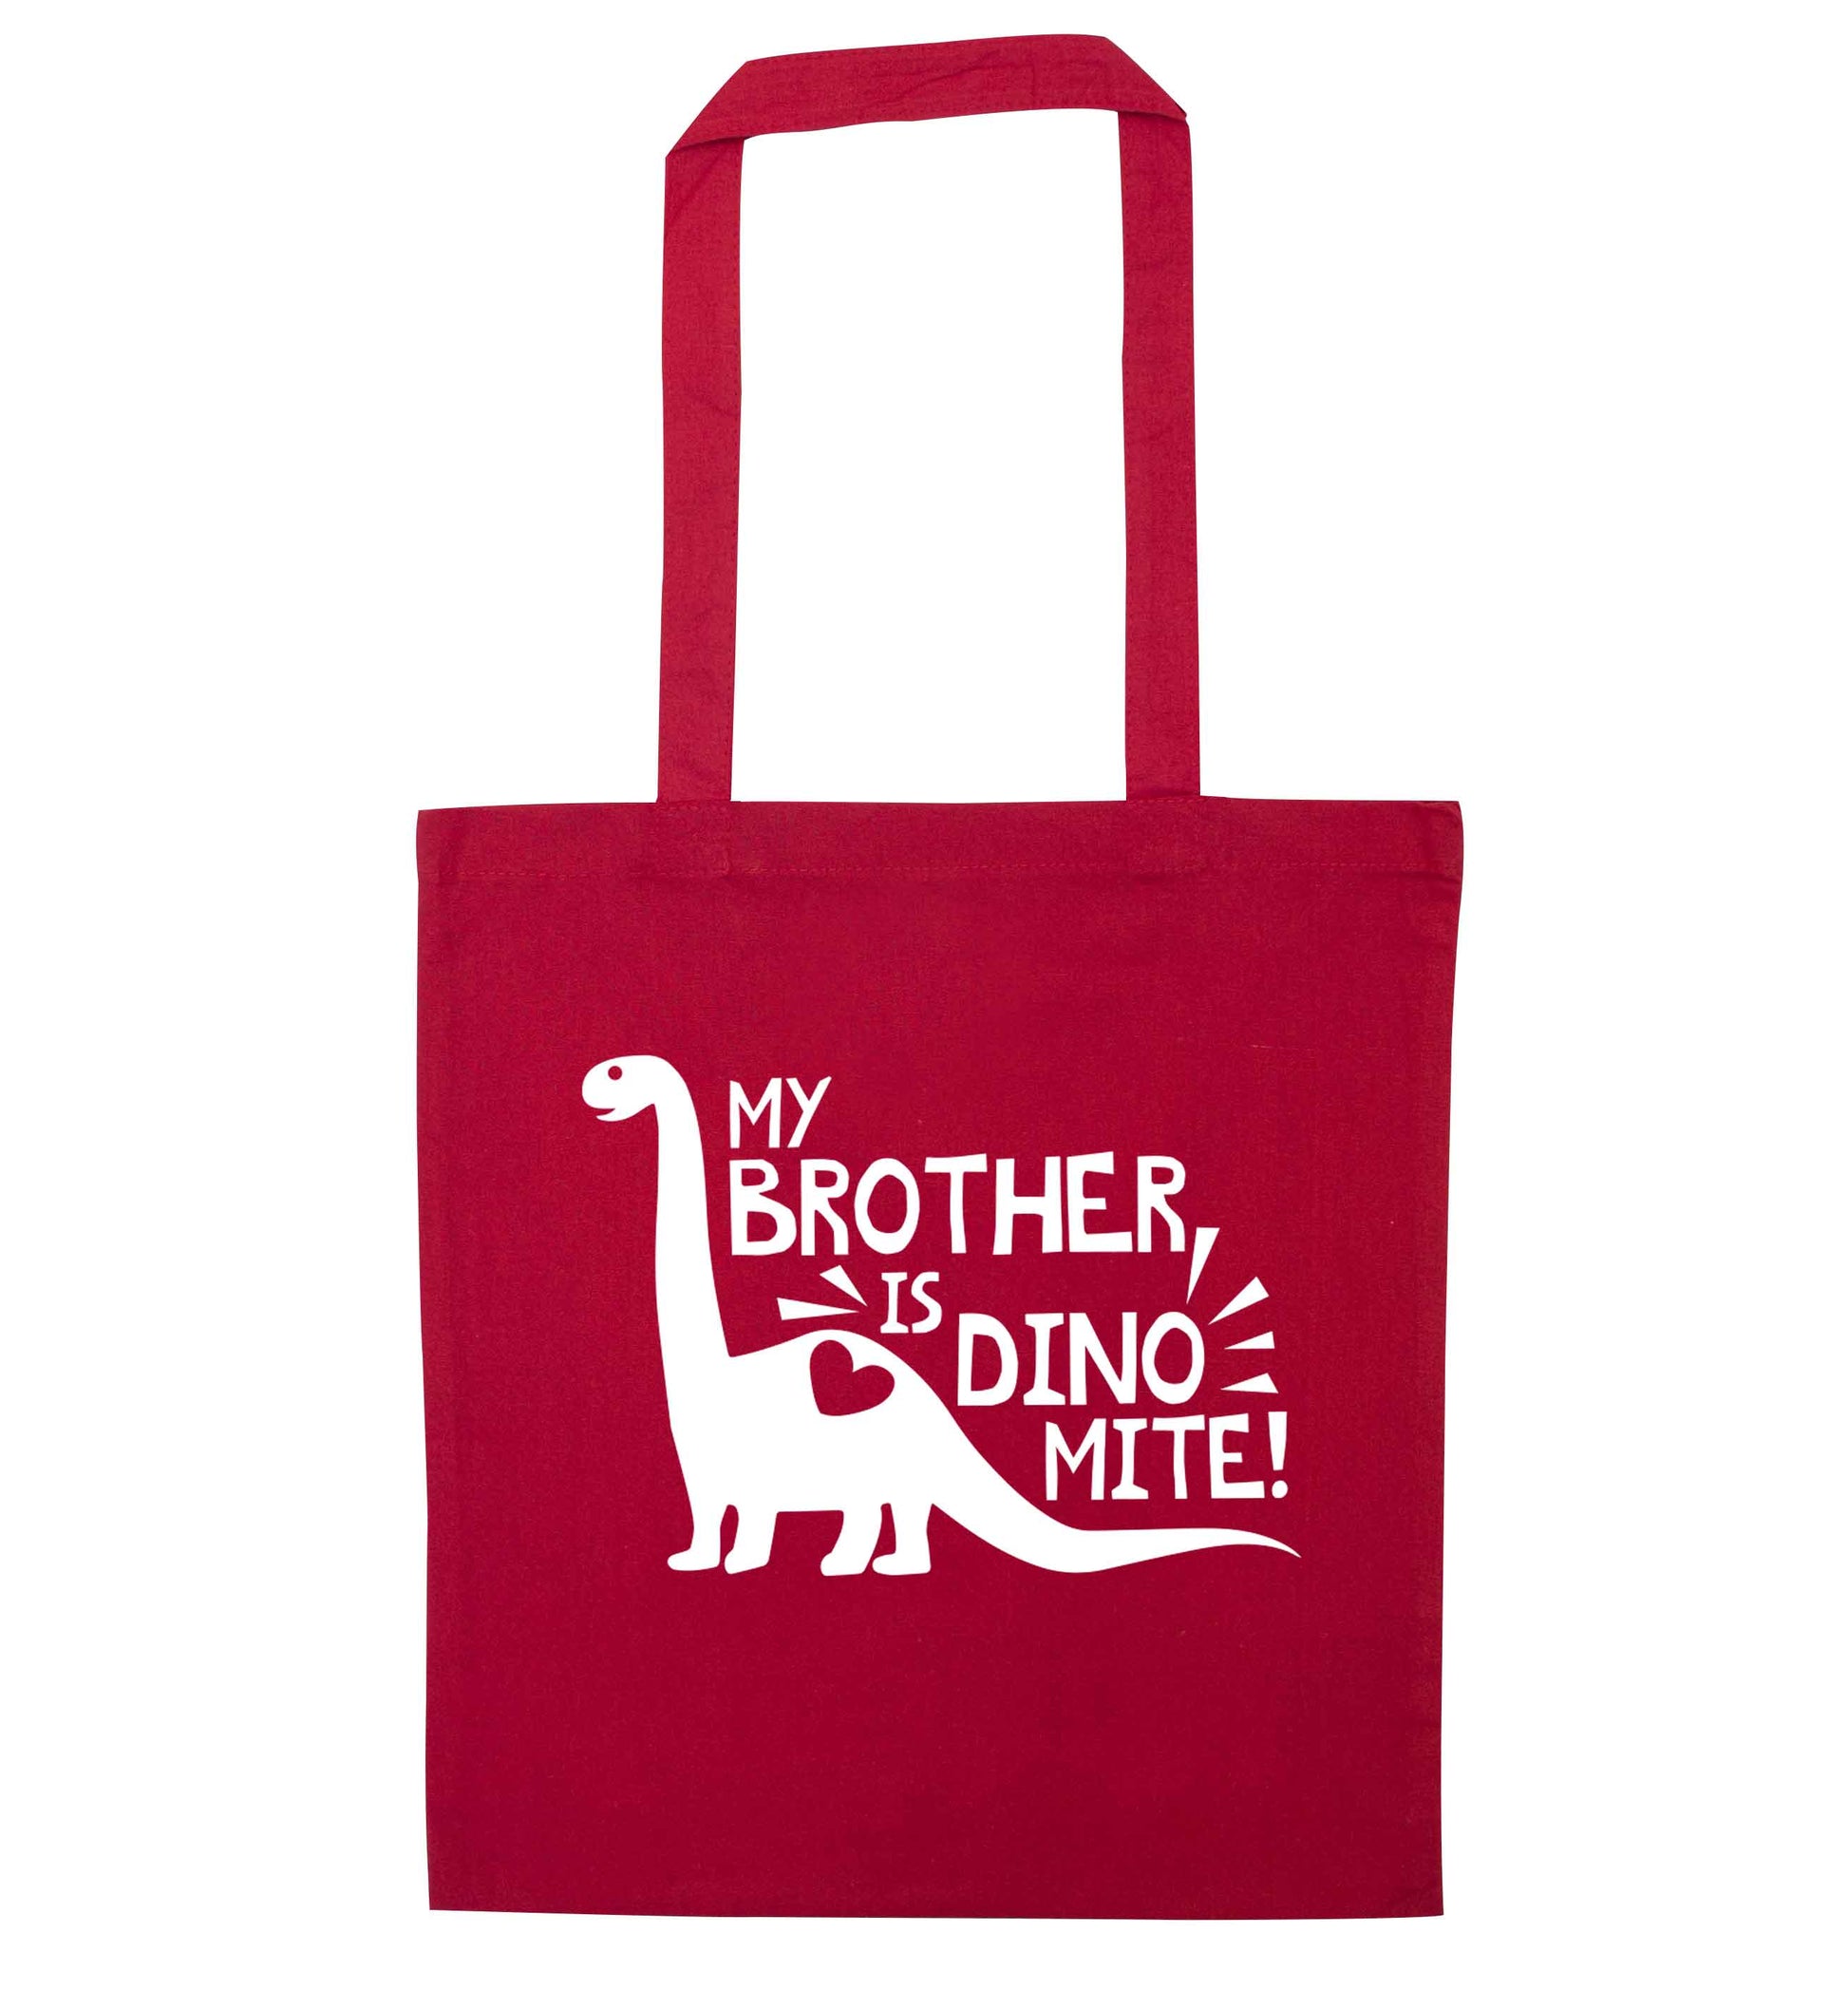 My brother is dinomite! red tote bag